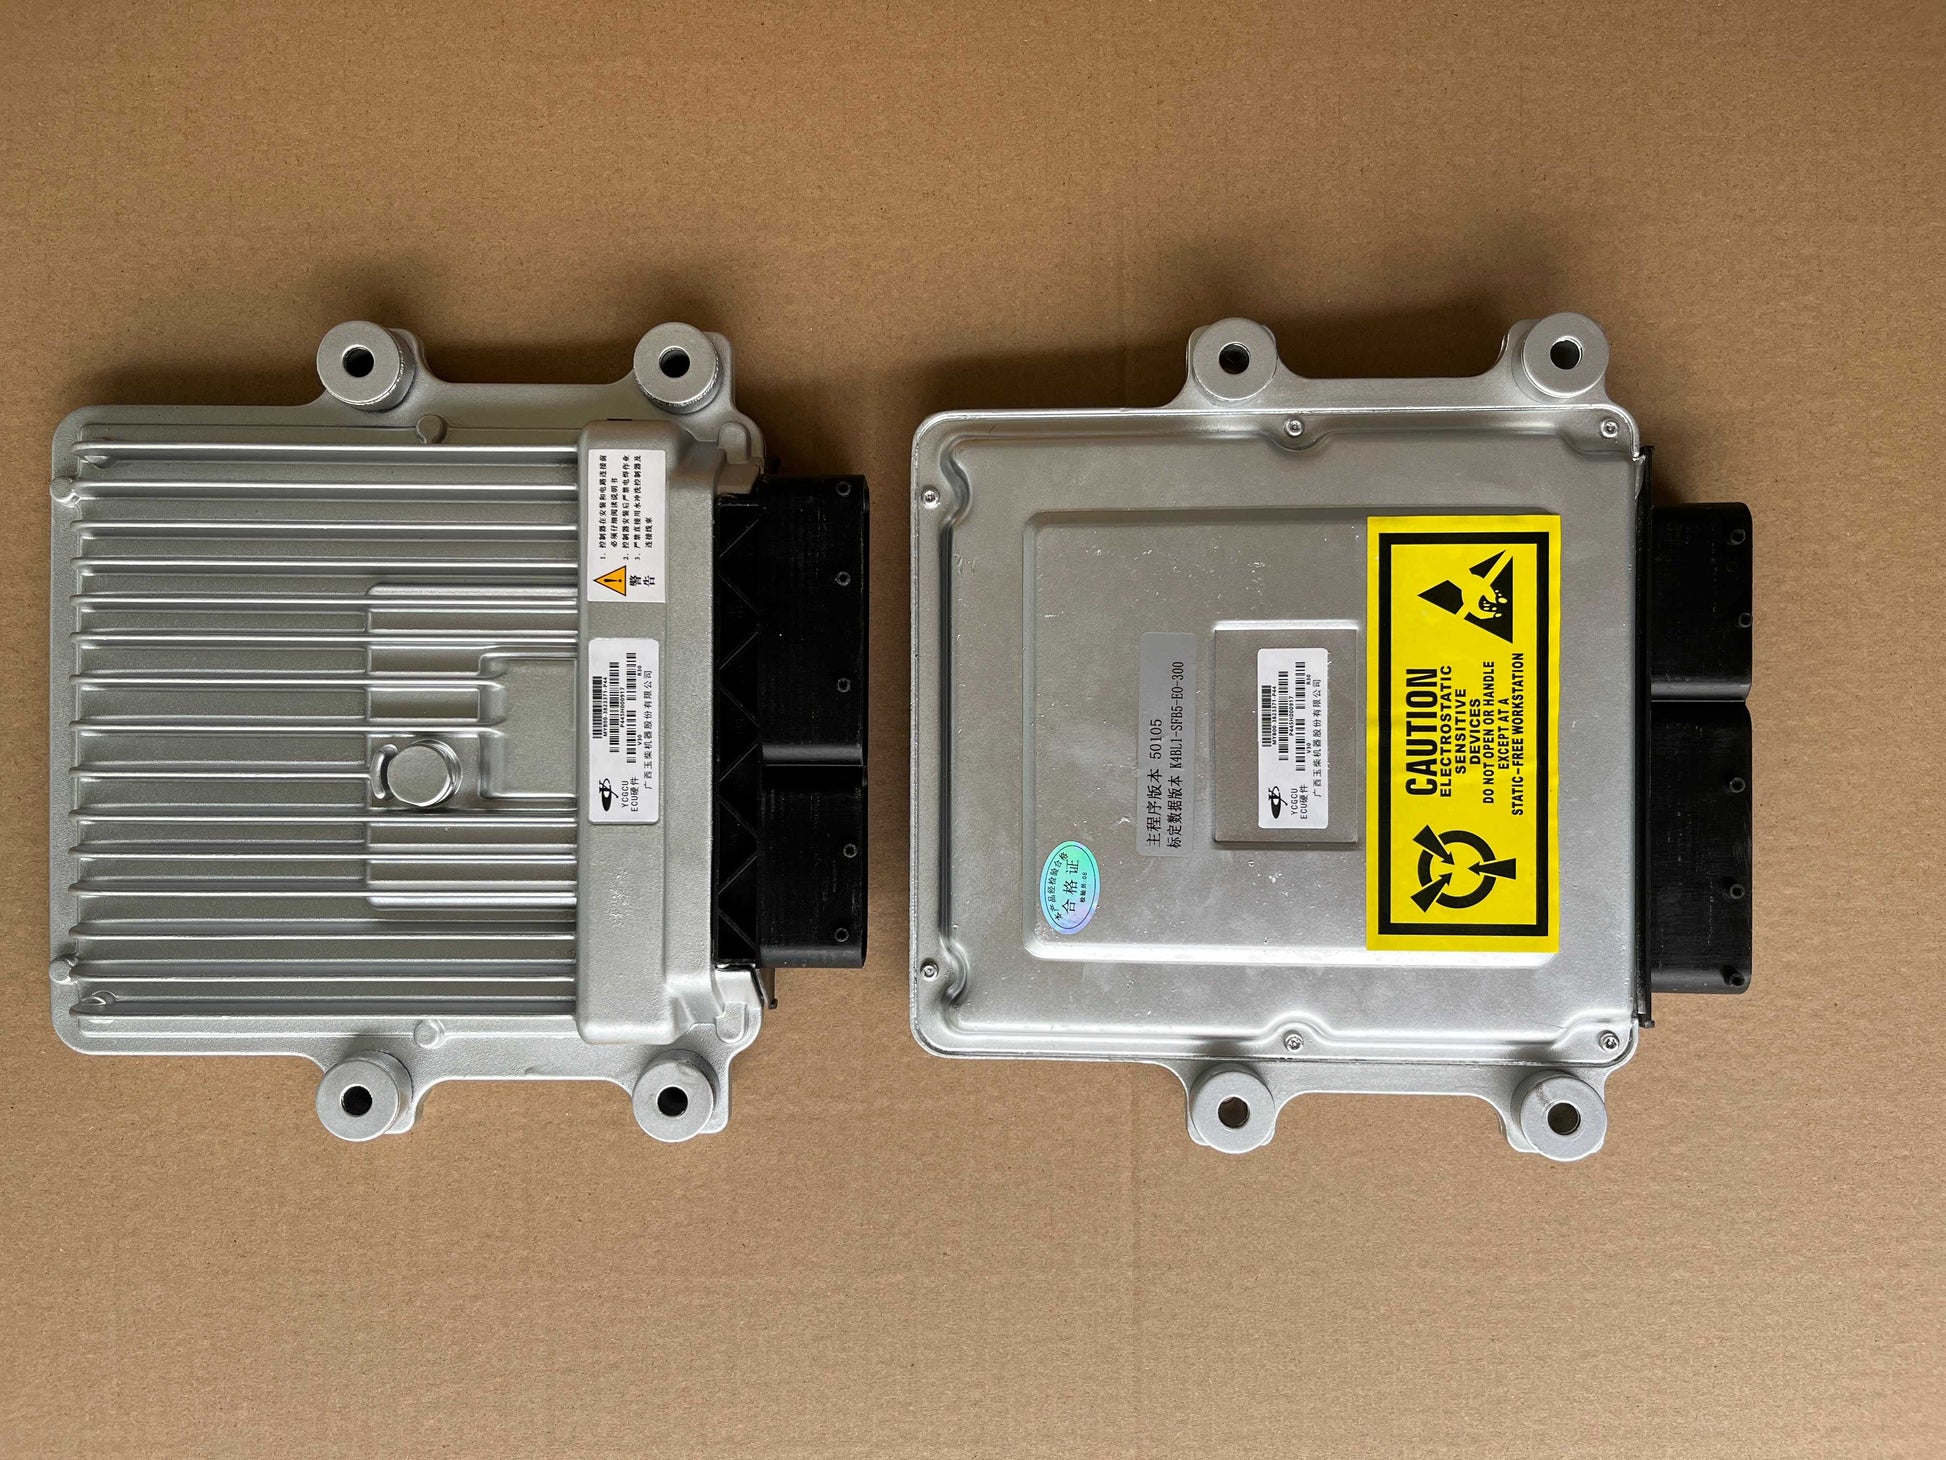 OEM: MYB00-3823371Material: MetalColor: SilverOrigin: Made in ChinaWeight: 1500gPacking List: 1* Used ECU Diesel Engine More ServiceWe can provide OEM Manufacturing serviceWe can Be your one-step solution for Auto PartsWe can provide technical scheme for you Feel Free to Contact Us, We will get back to you as soon as possible.